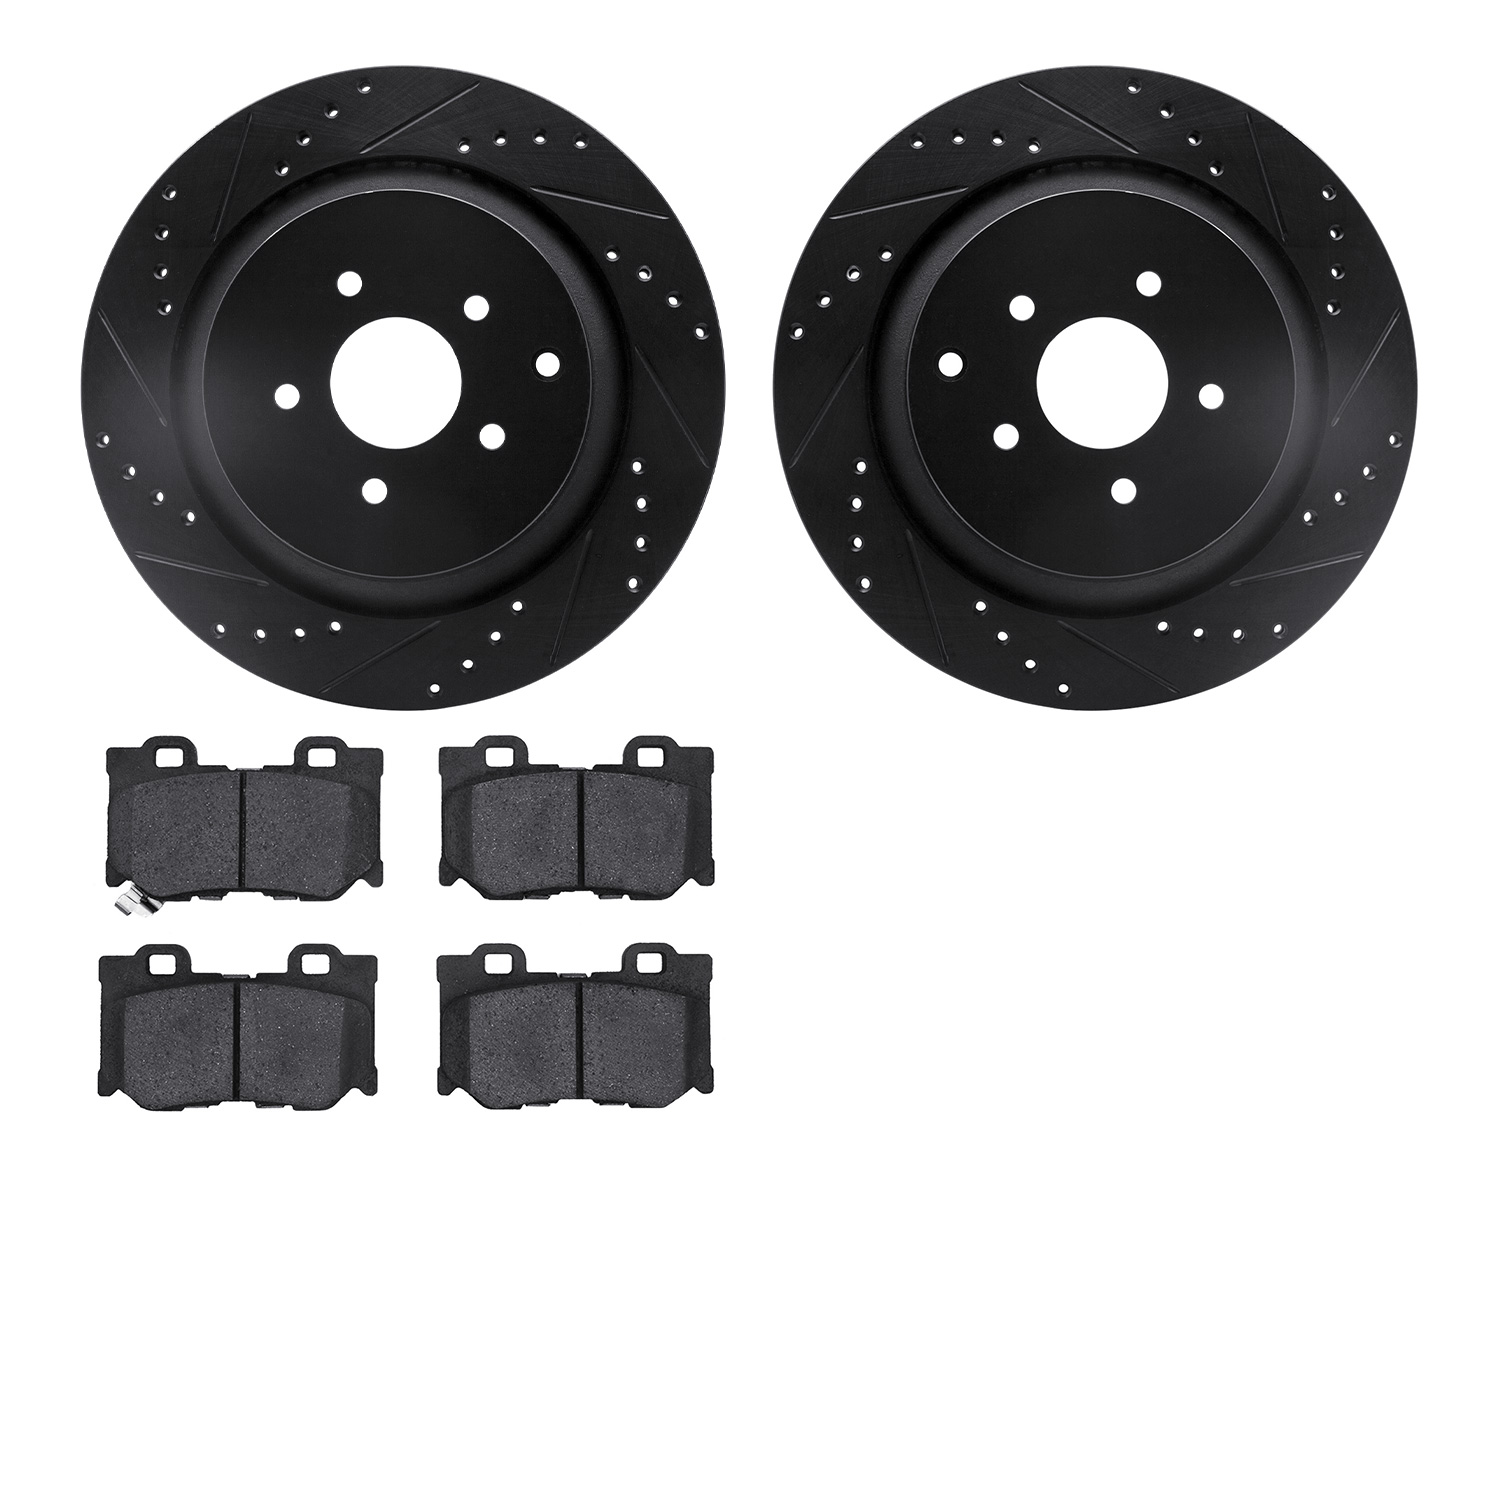 8302-68017 Drilled/Slotted Brake Rotors with 3000-Series Ceramic Brake Pads Kit [Black], Fits Select Infiniti/Nissan, Position: